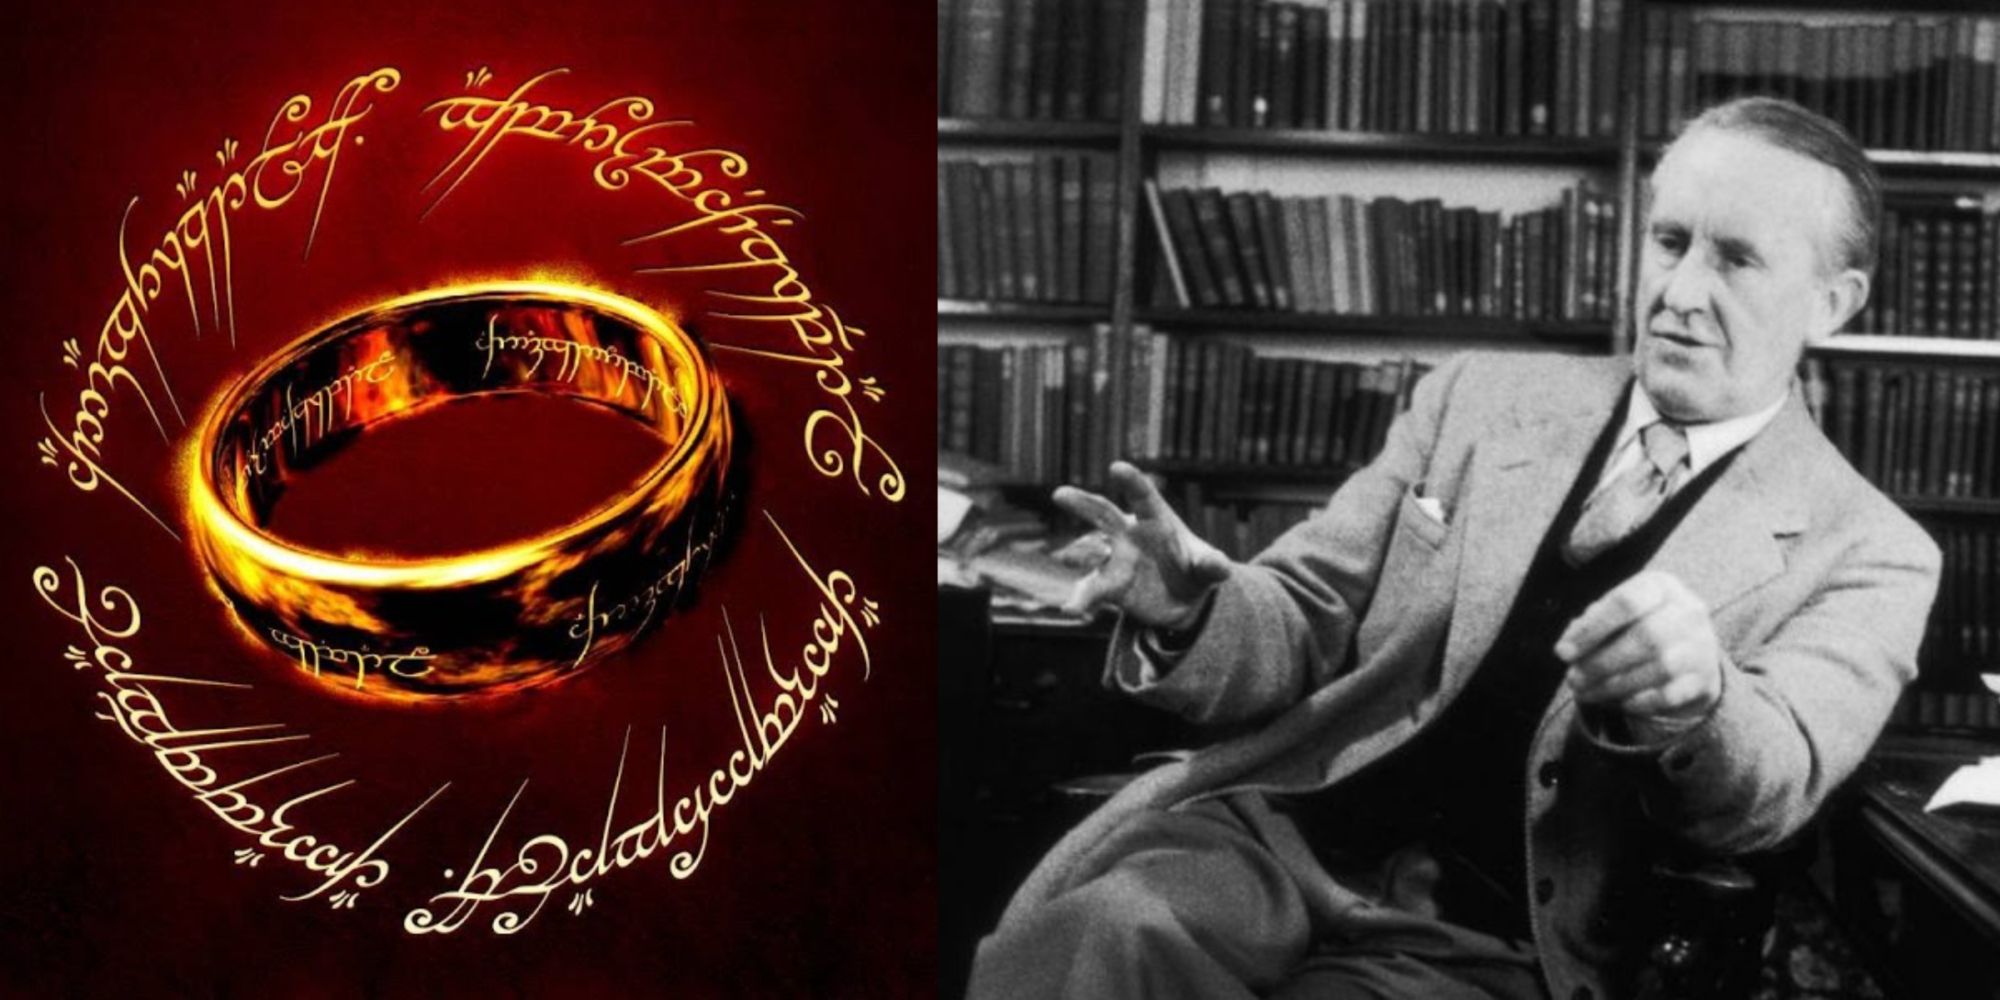 title Tolkien languages one ring with script JRR Tolkien with books in background 